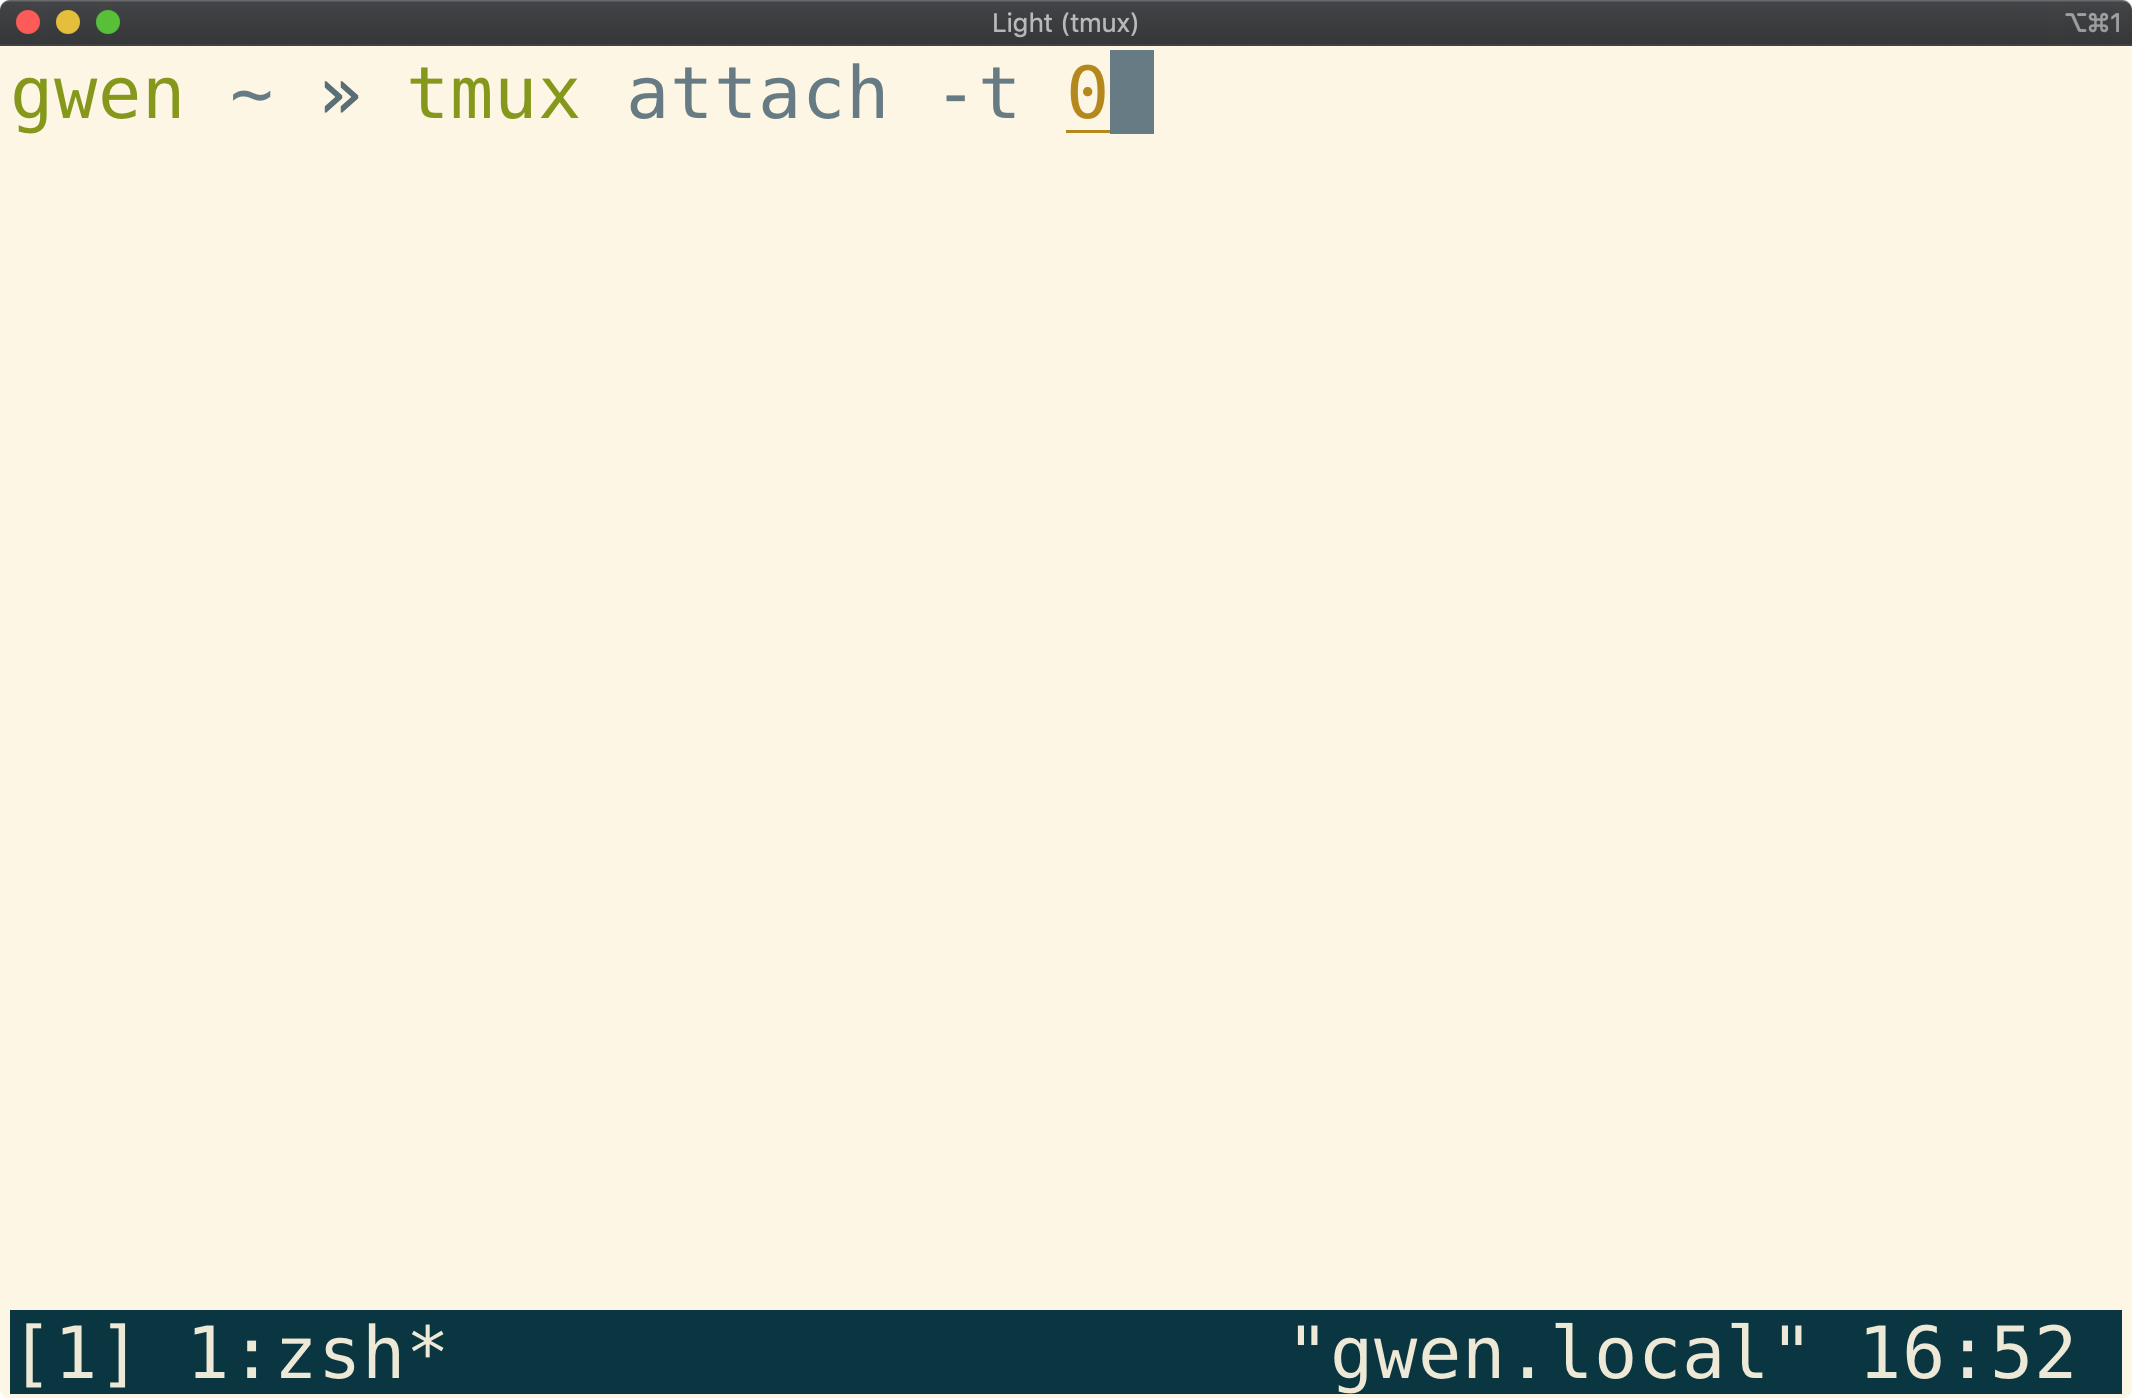 Tmux window showing session 1